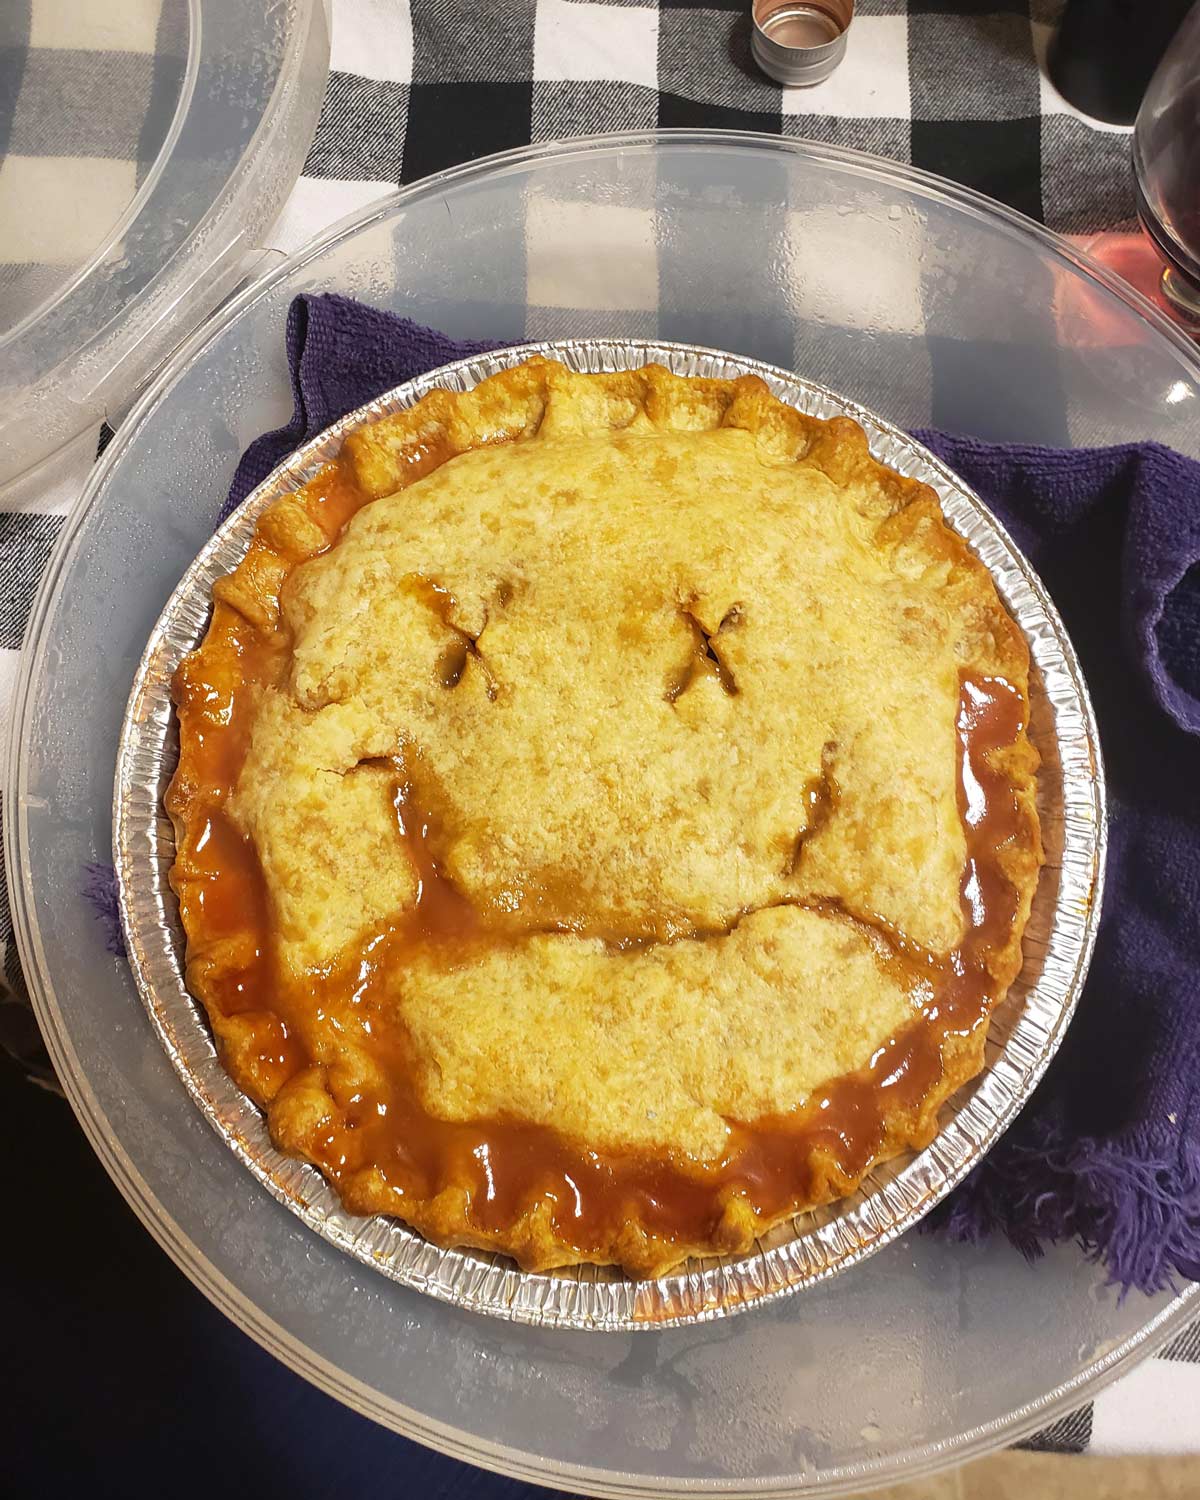 My aunt tried to put a smiley face in a pie